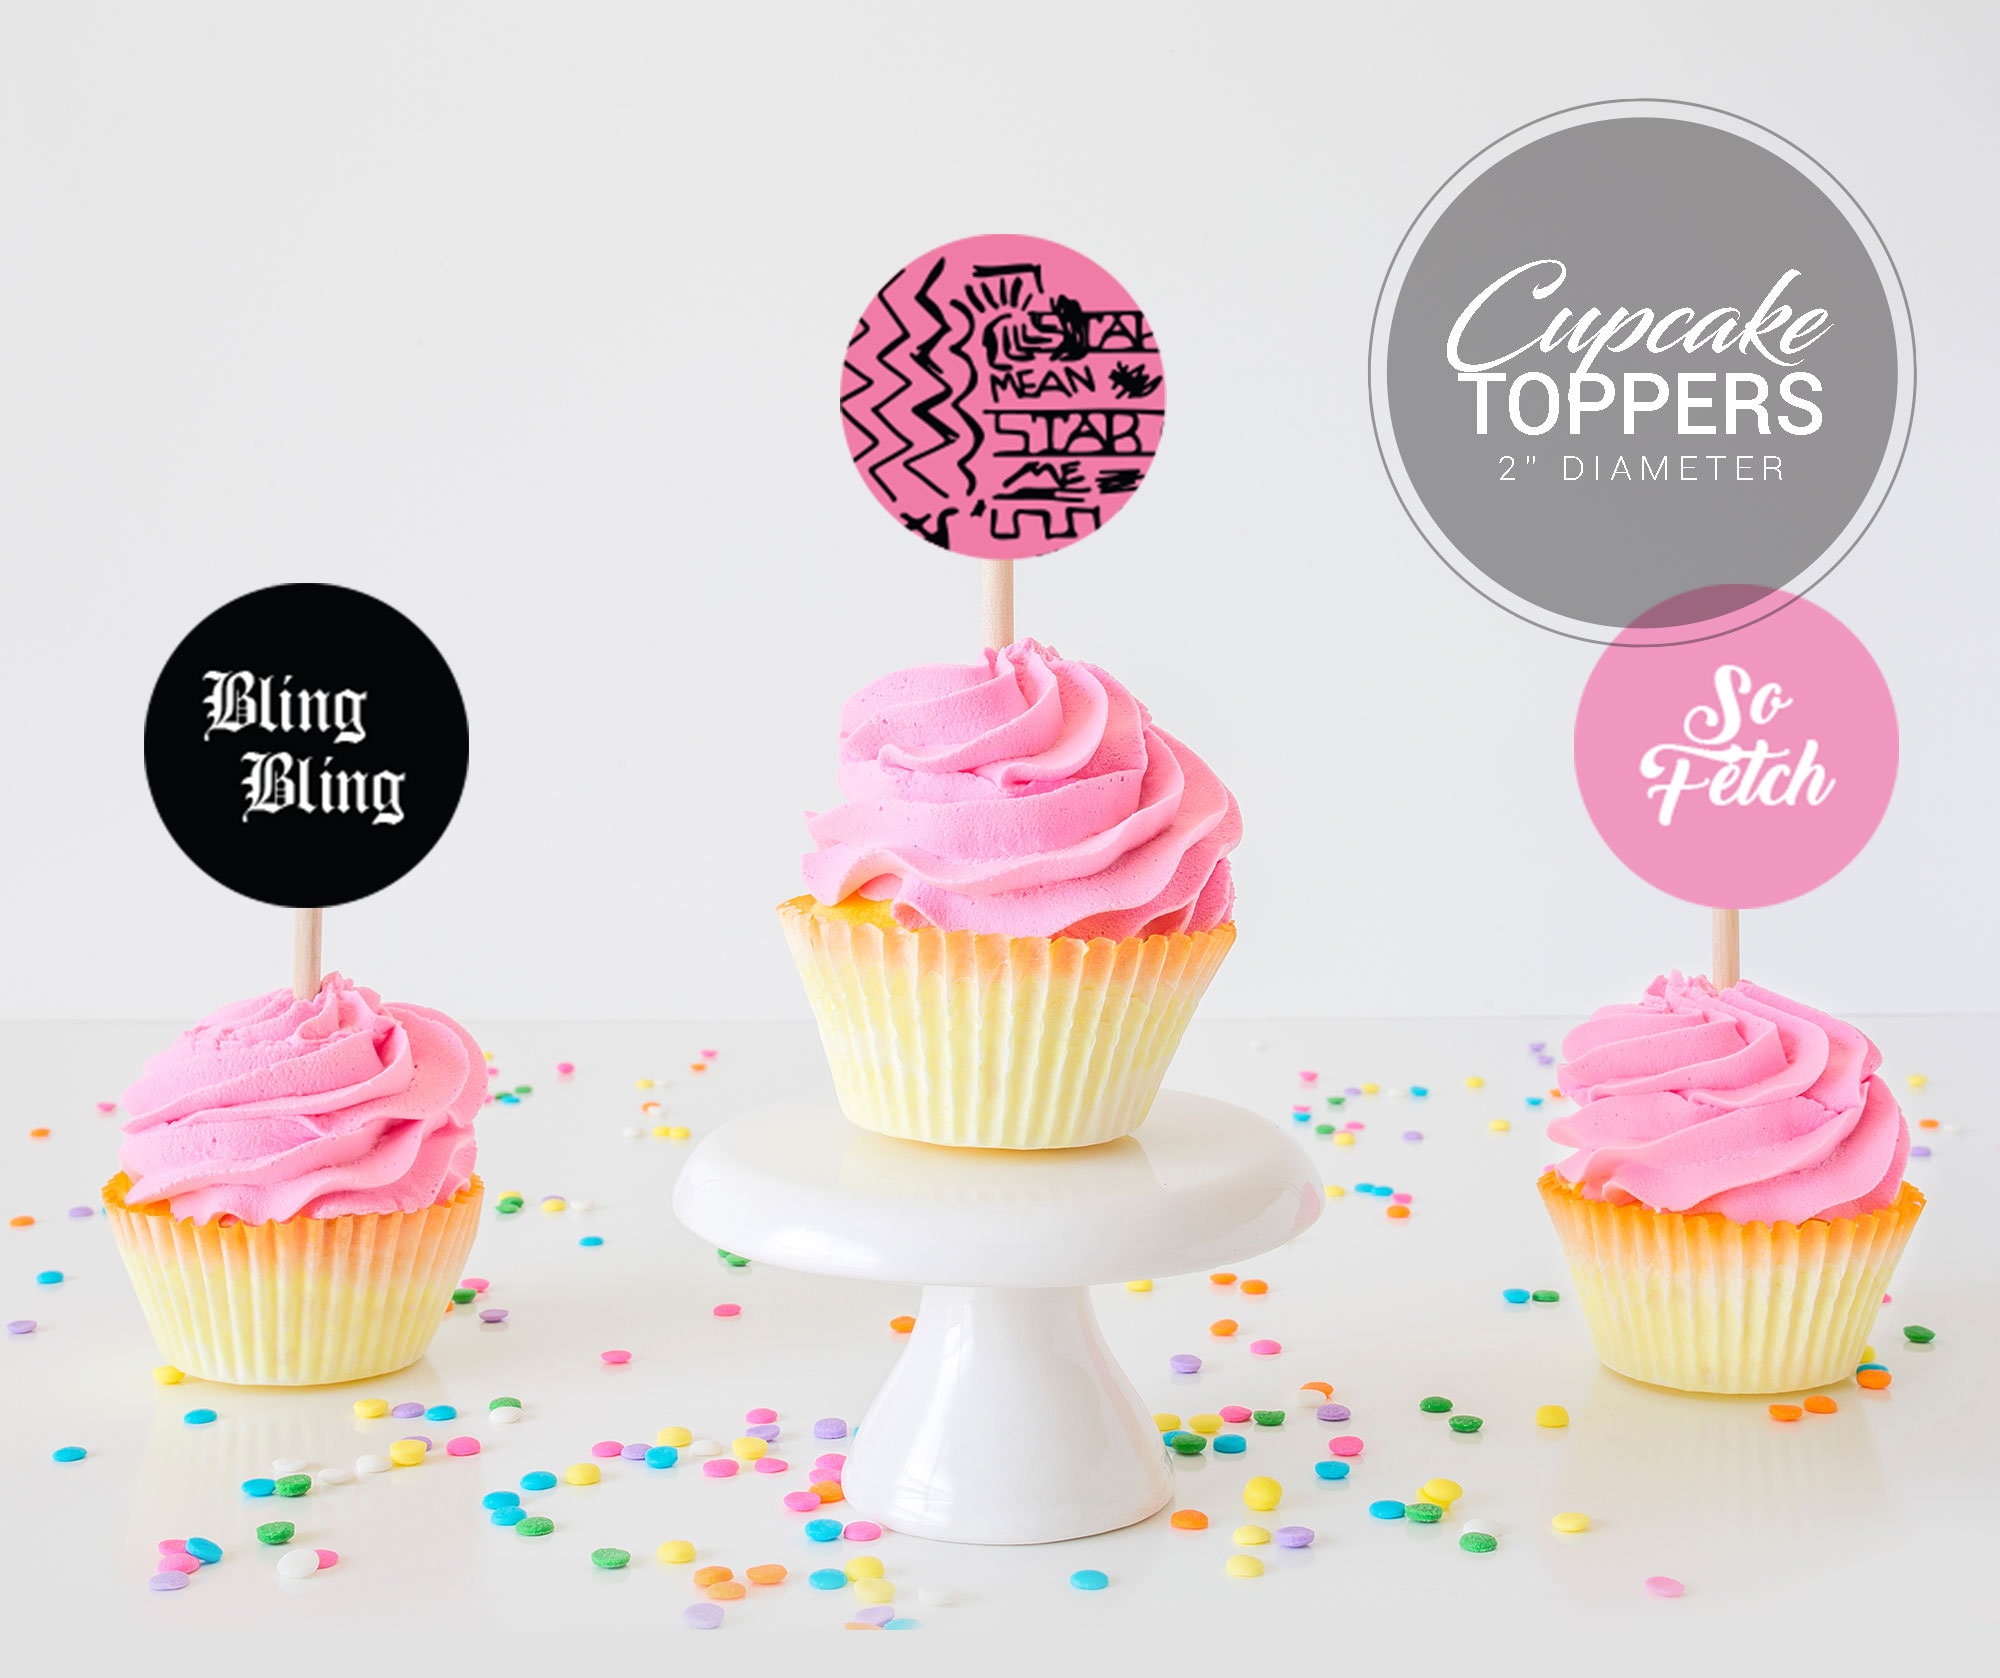  37 PCS Mean Girls Cupcake Toppers for Mean Girls Theme Party  Birthday Party Wedding Baby Shower Fans Party Cake Dessert Decorations  Supplies Picks : Grocery & Gourmet Food